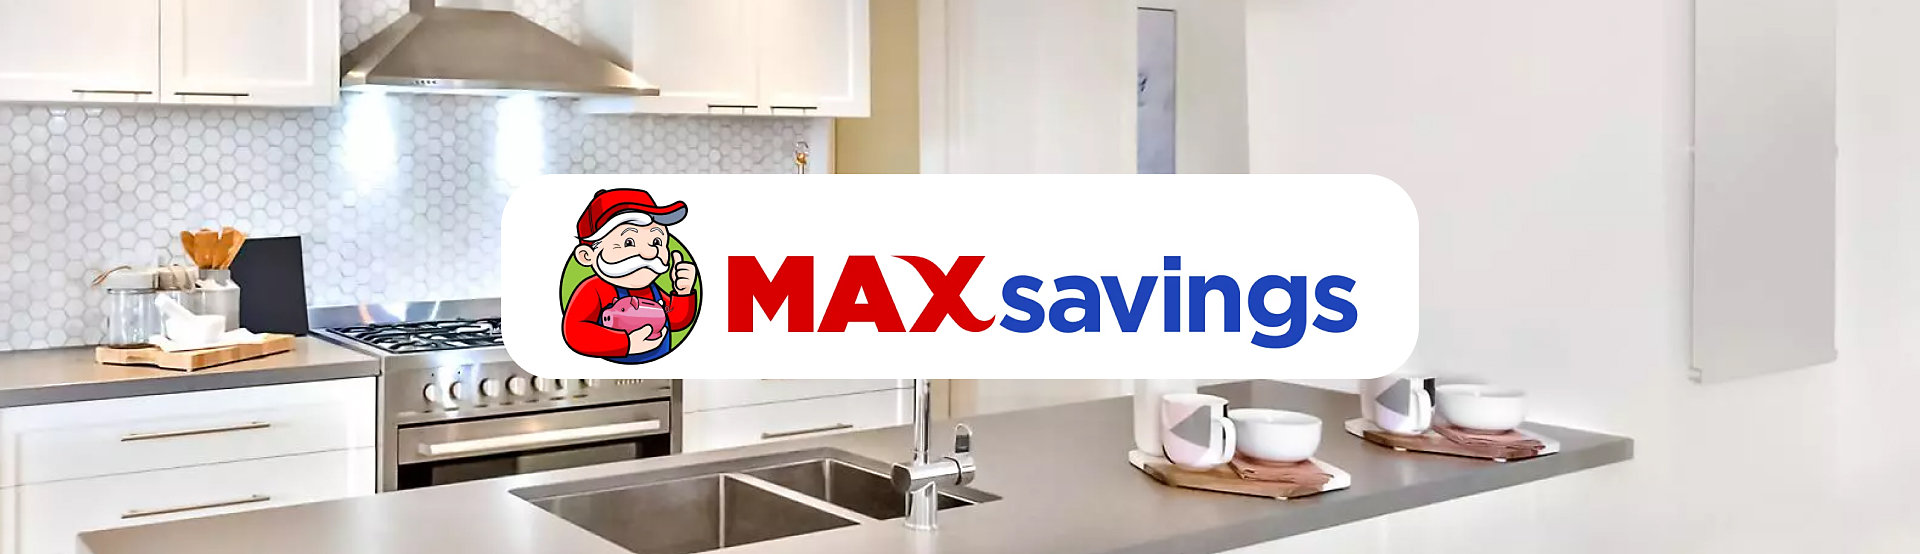 Max Savings Logo with kitchen background